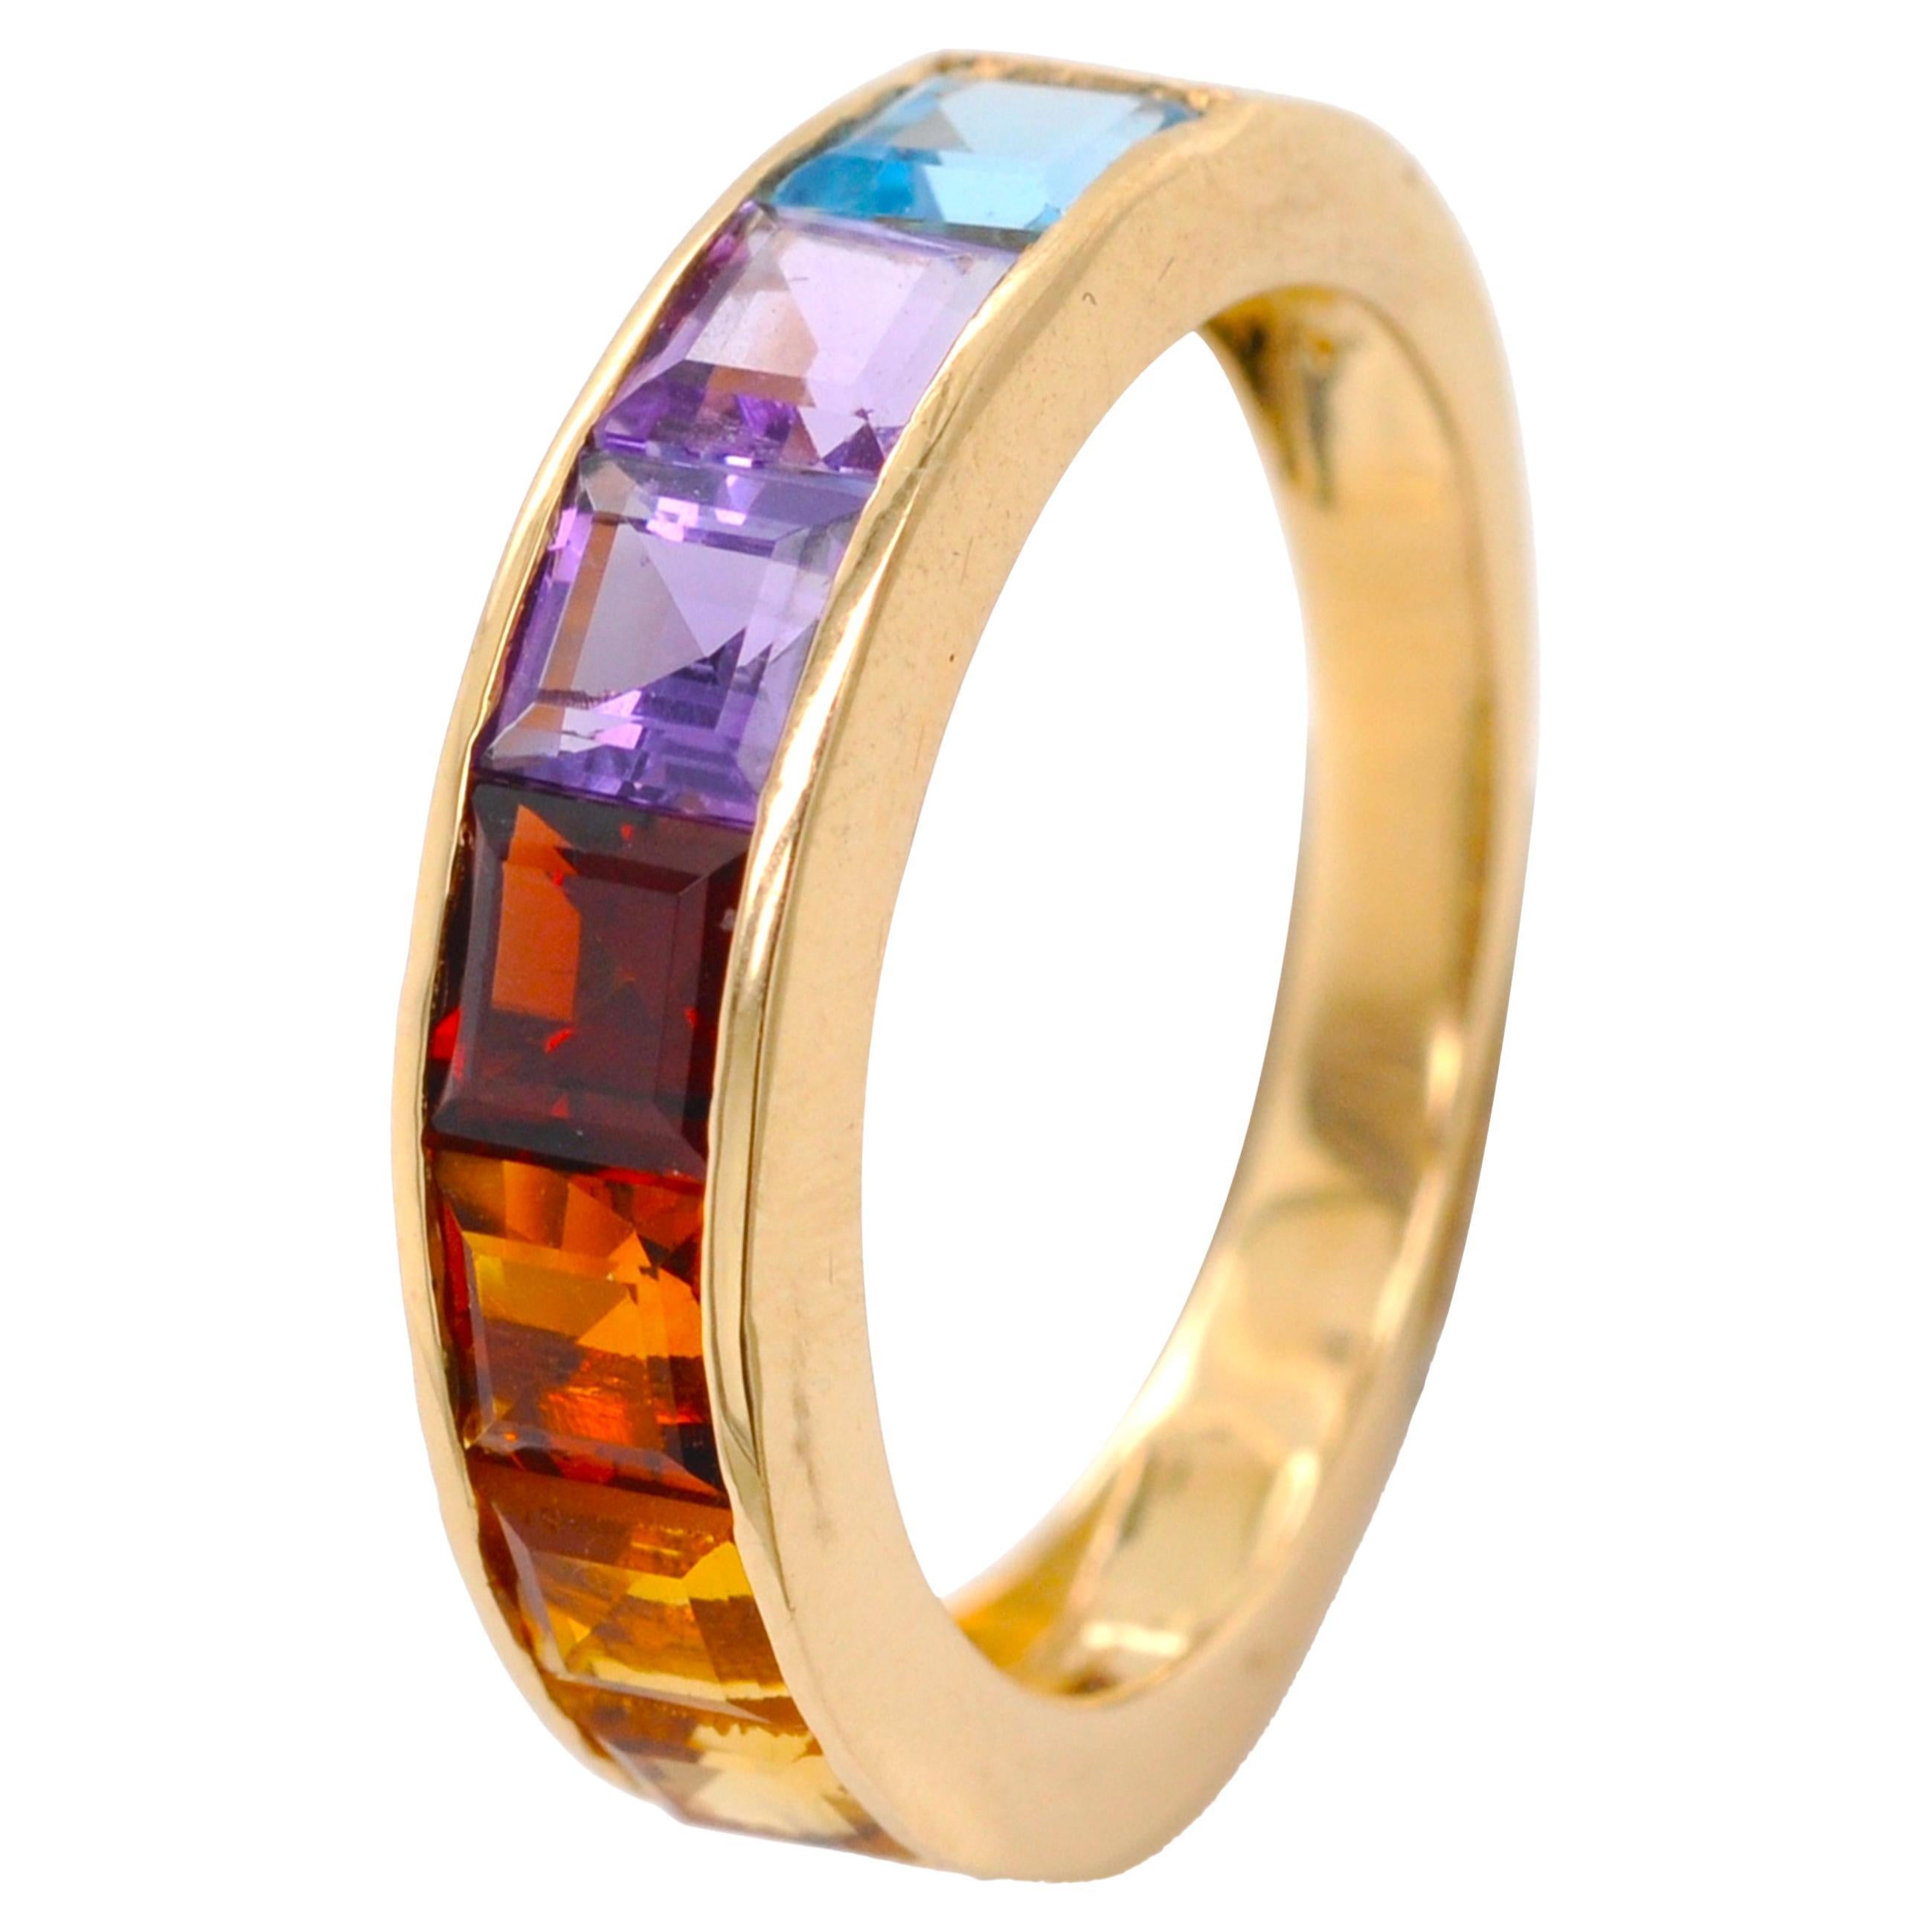 For Sale:  18K Gold Channel-Set 4 MM Square Rainbow Gemstones Eternity Half Band Ring